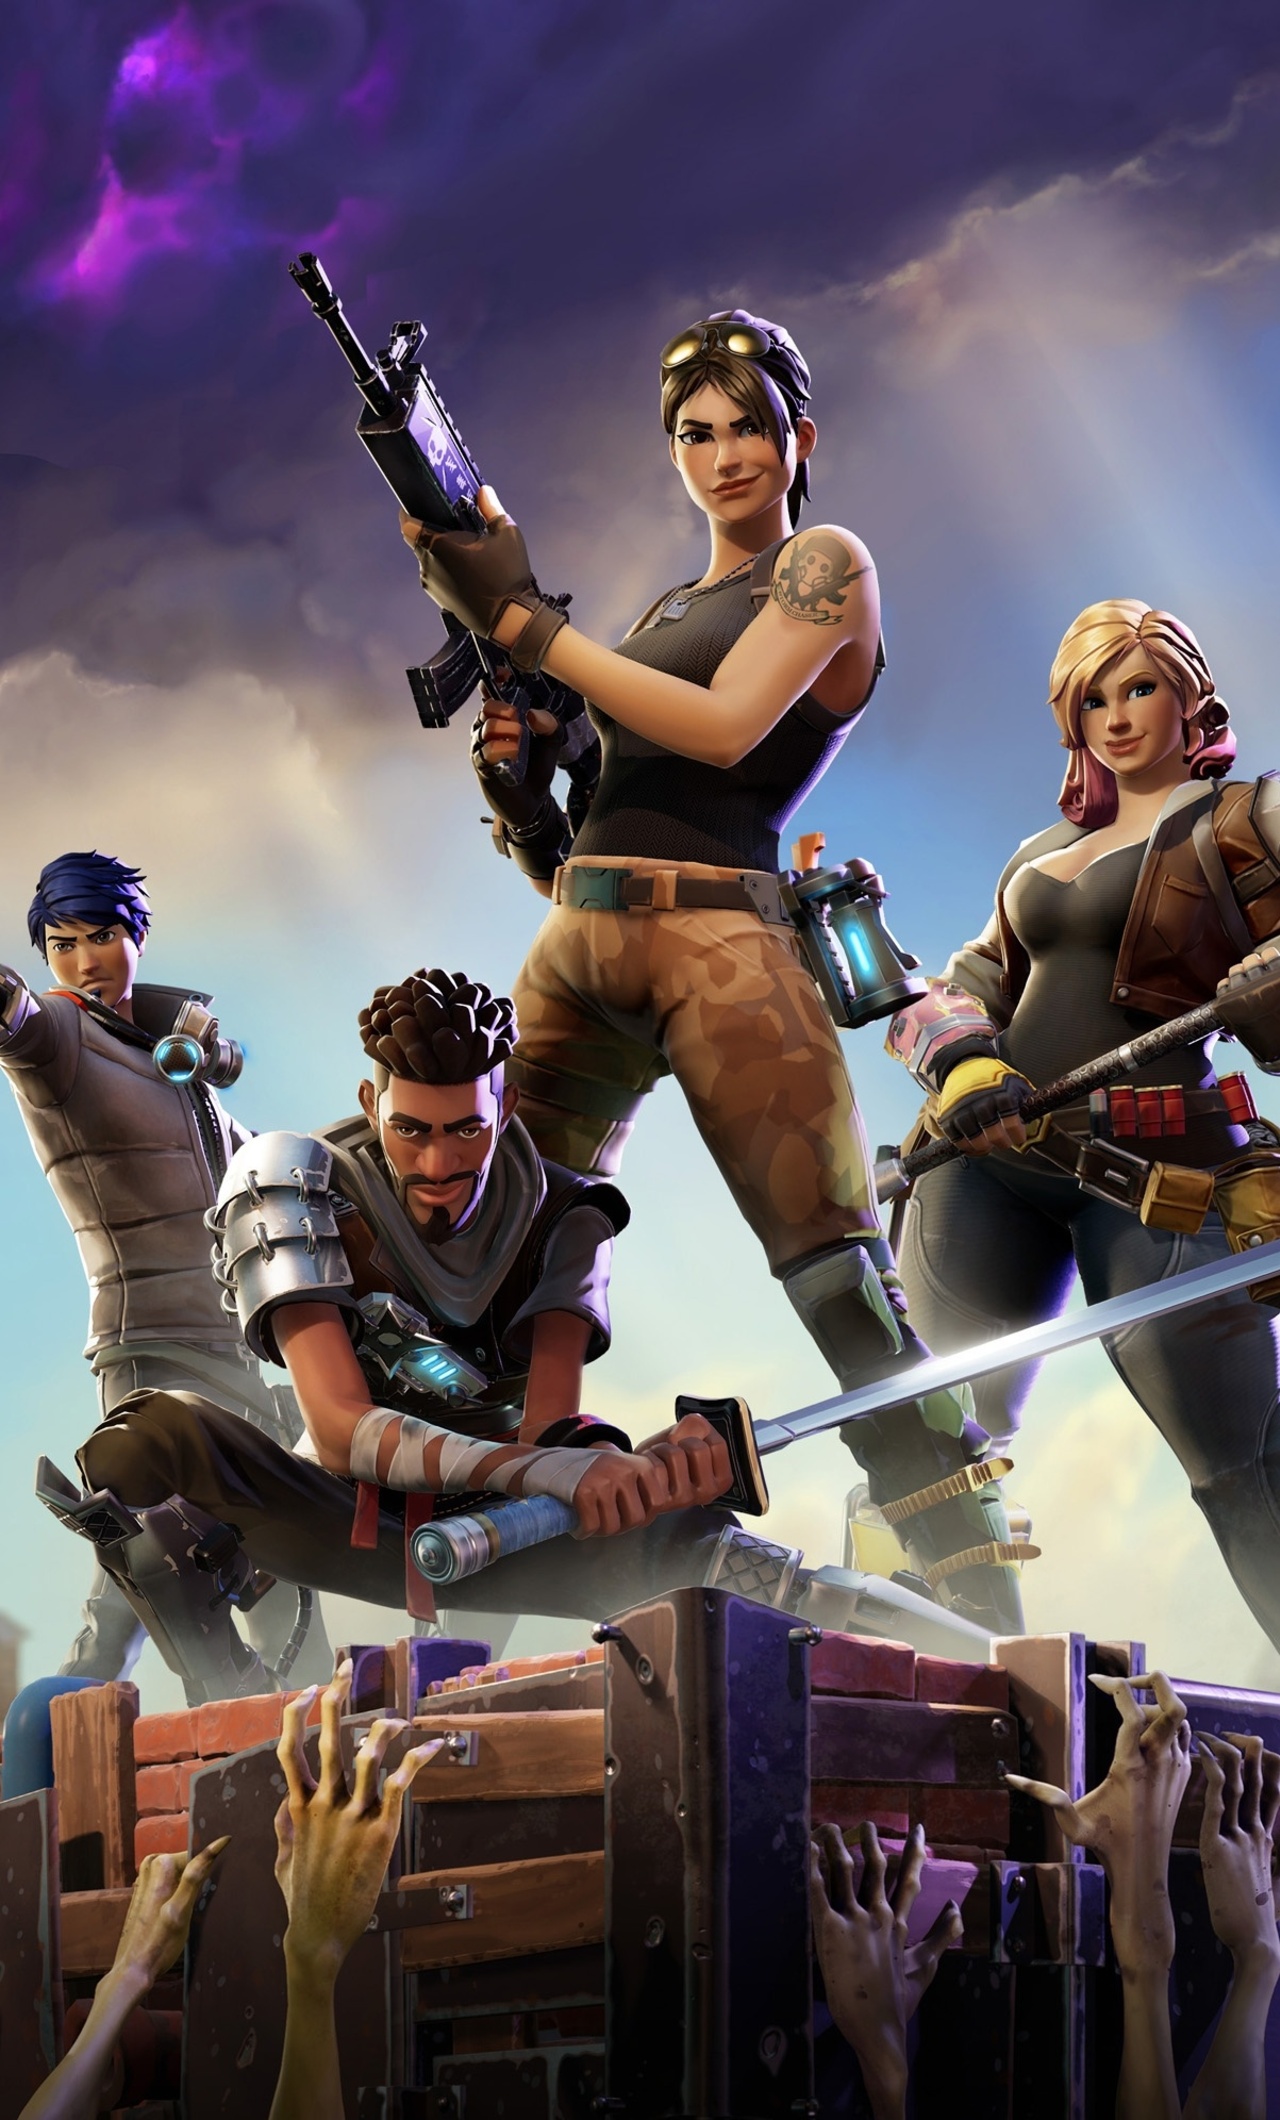 How to download fortnite on a macbook air